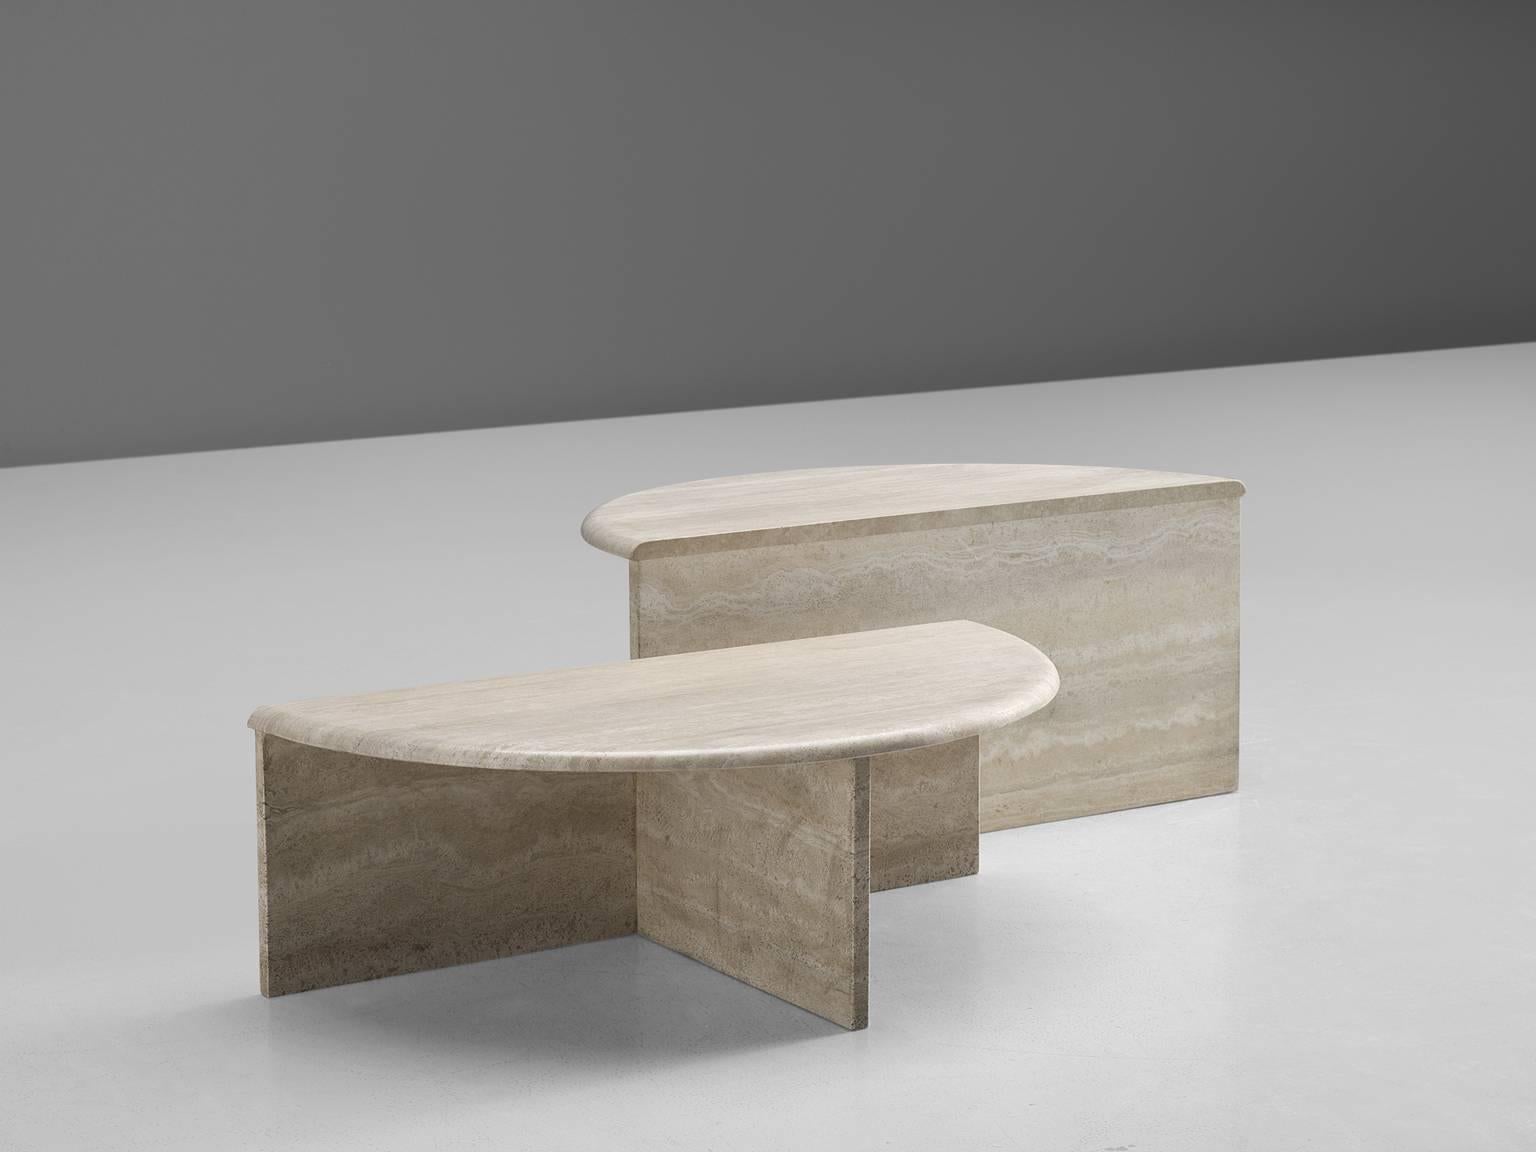 Semi-circular coffee tables in travertine, Europe, 1970s. 

The design of these two coffee table is graphical and features balanced proportions. The tables can be used in various setting by means of which different types of tables can be created.